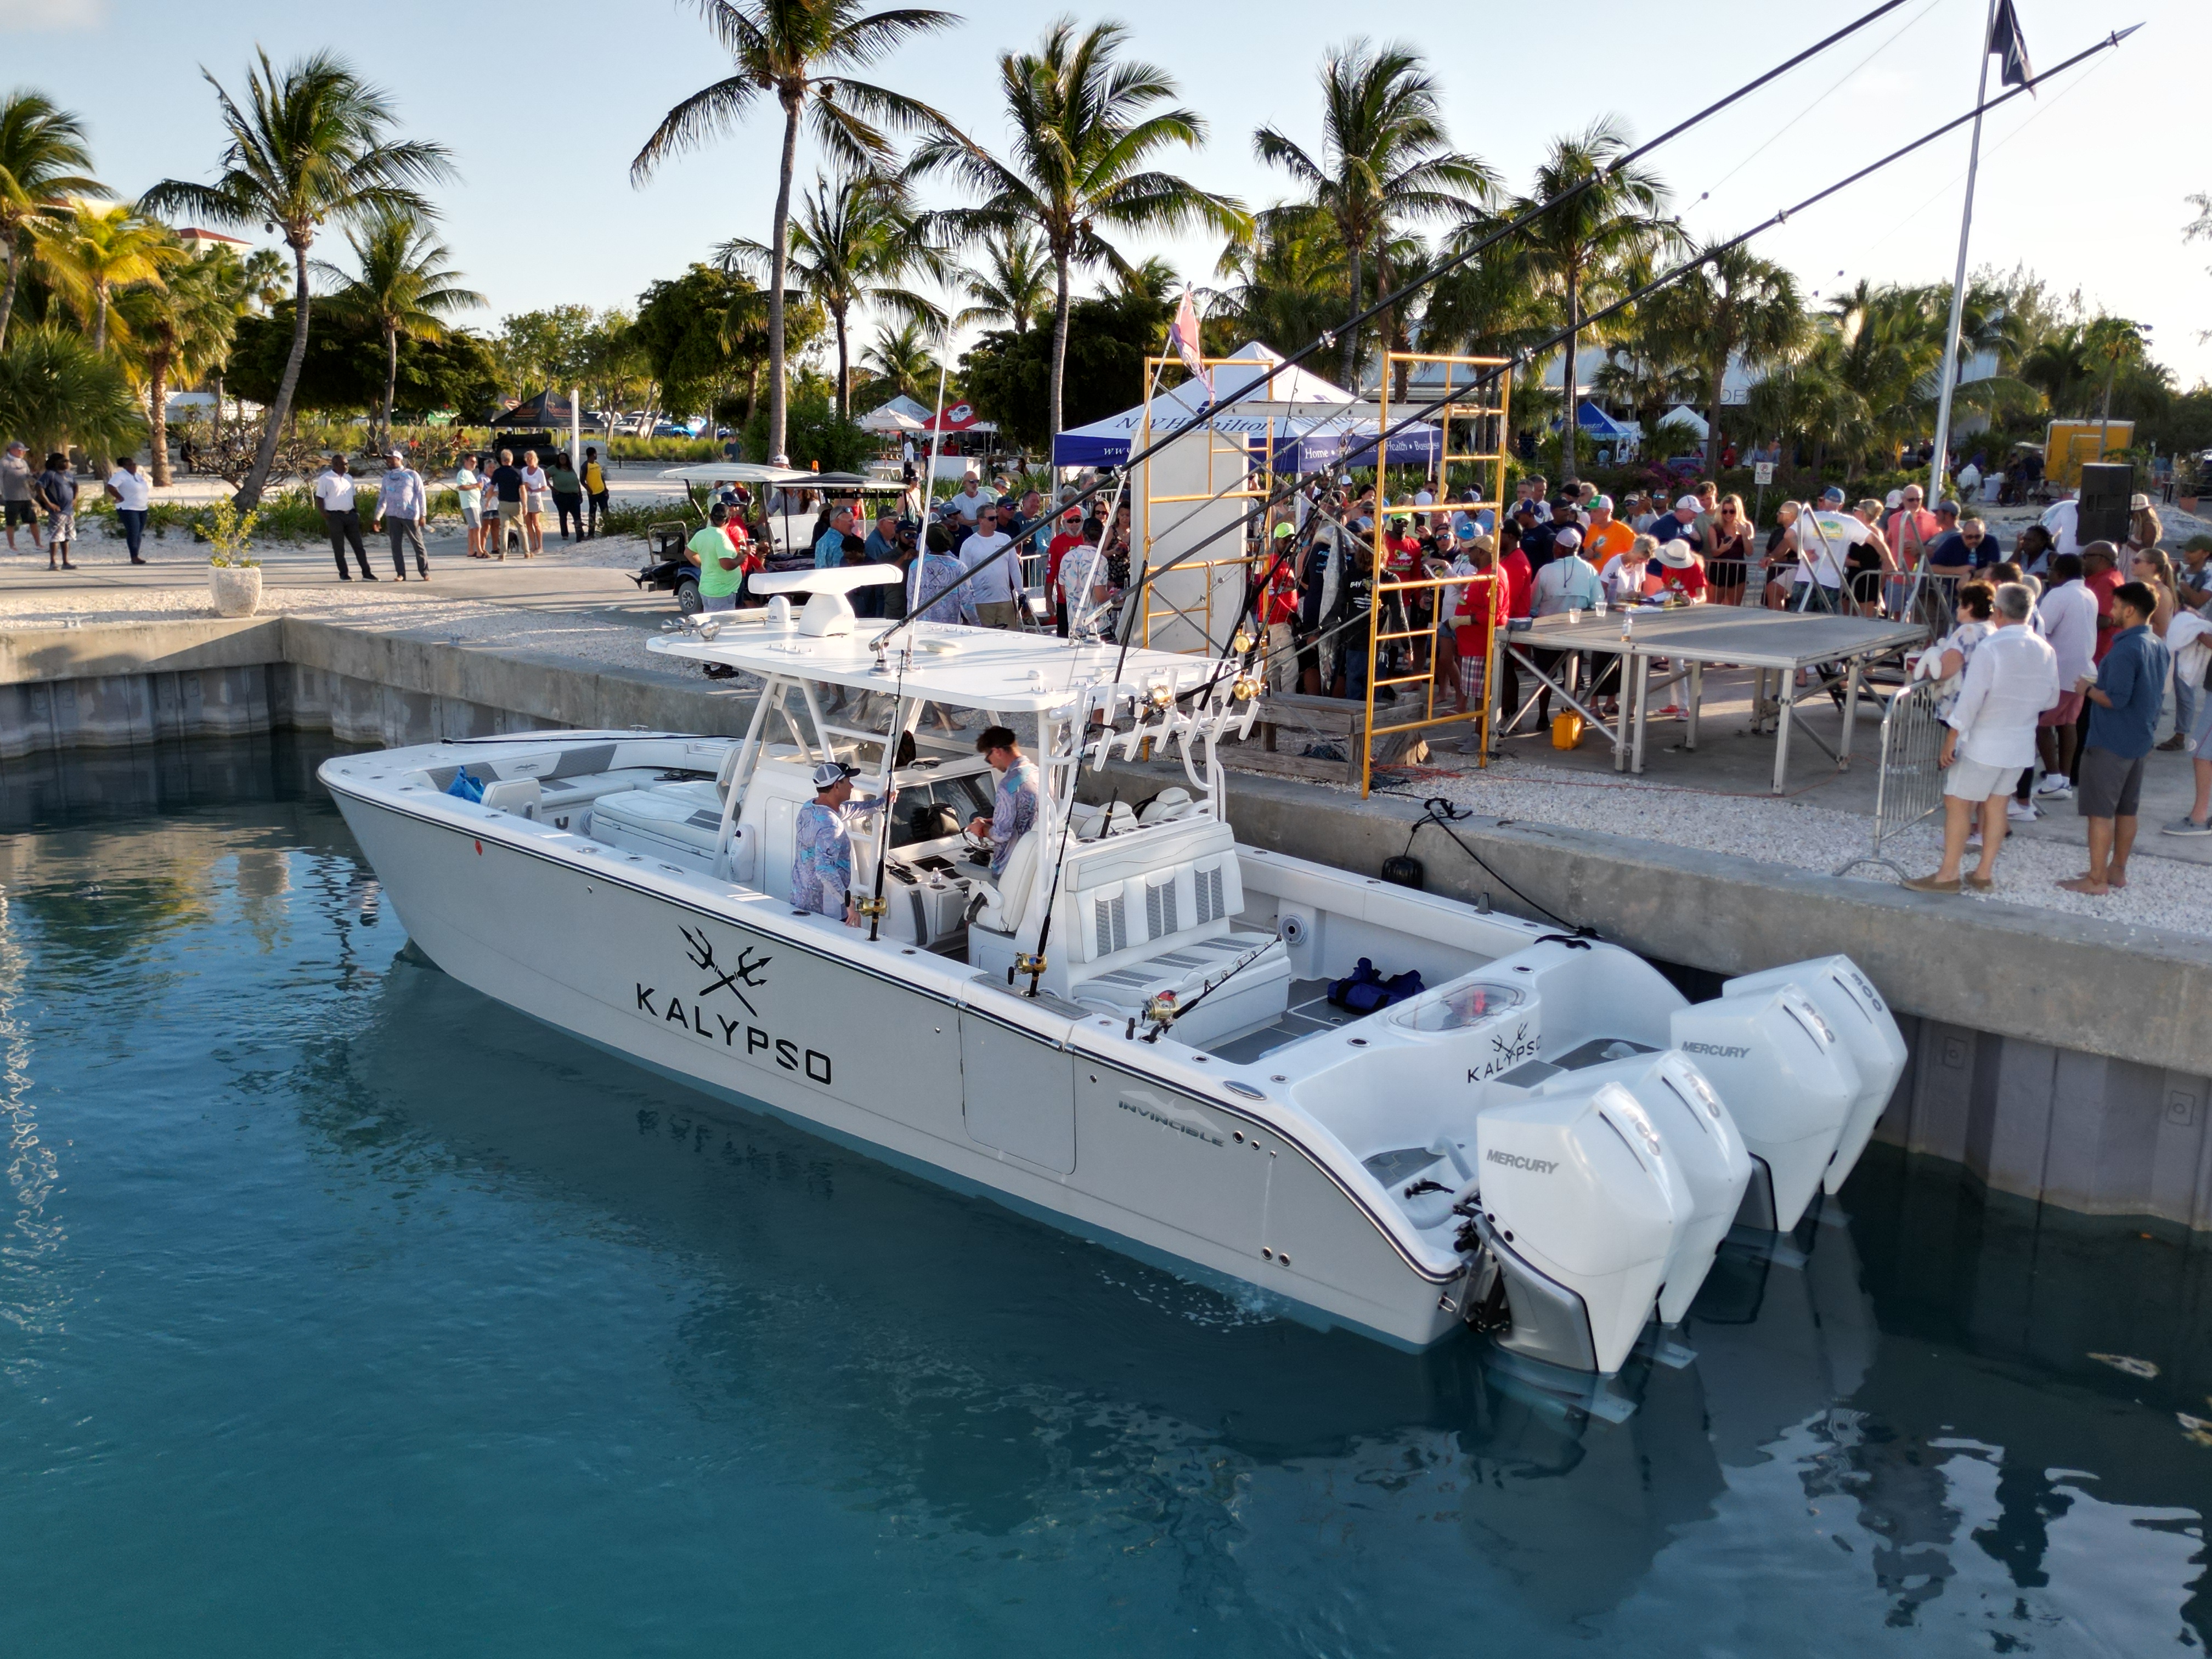 Team Kalypso - Invincible Boats 37' Catamaran at the weigh in in FGT Tournament